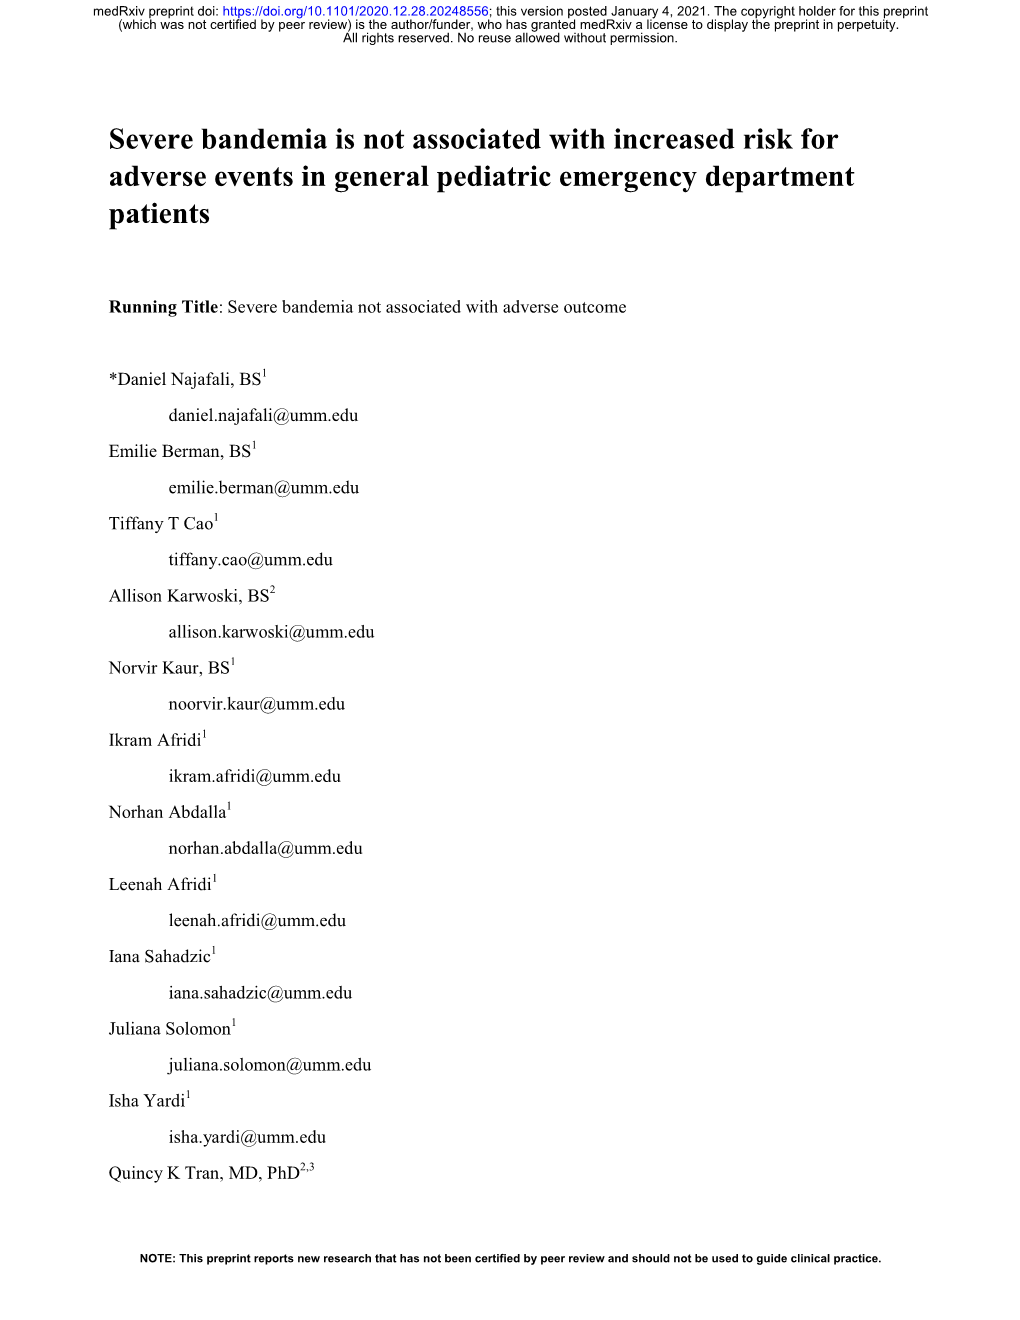 Severe Bandemia Is Not Associated with Increased Risk for Adverse Events in General Pediatric Emergency Department Patients